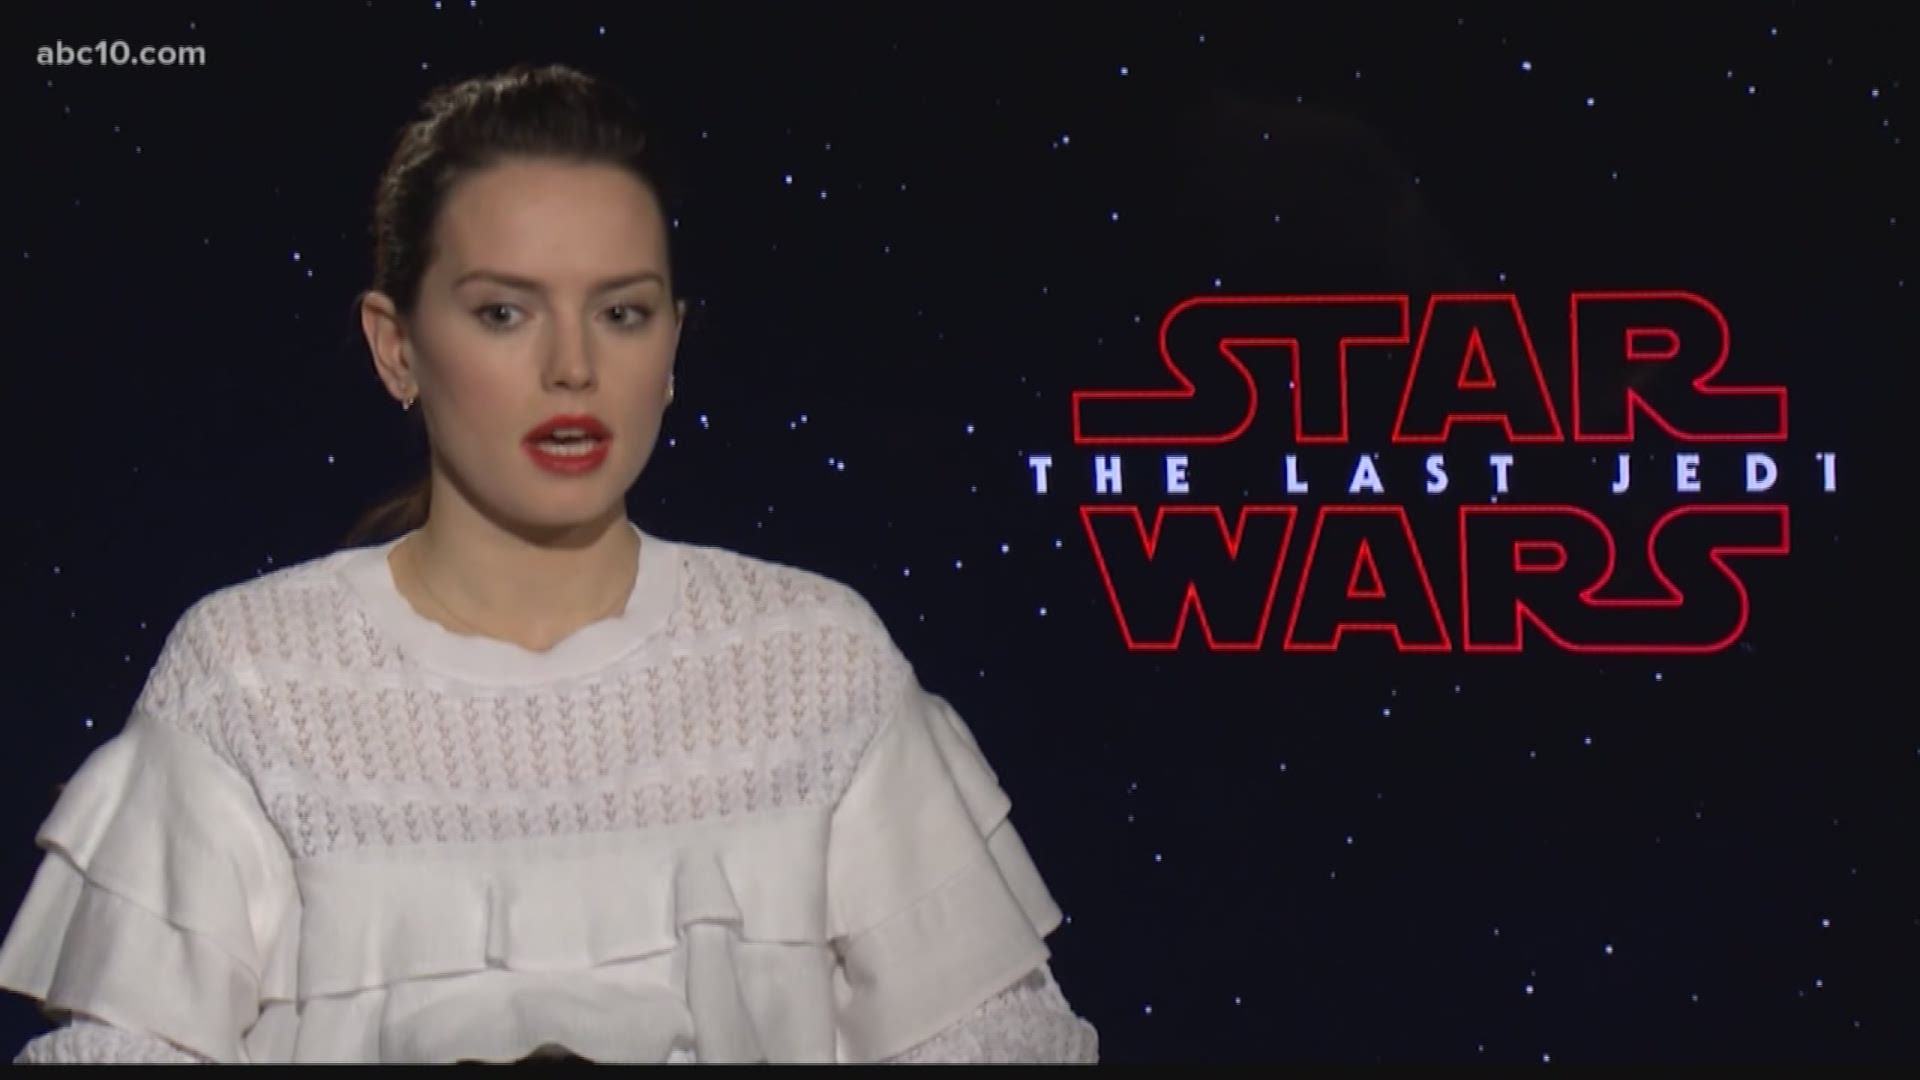 Mark S. Allen sat down with "Star Wars" star Daisy Ridley to talk about the franchises latest installment. (Travel and accommodation costs paid by Disney)